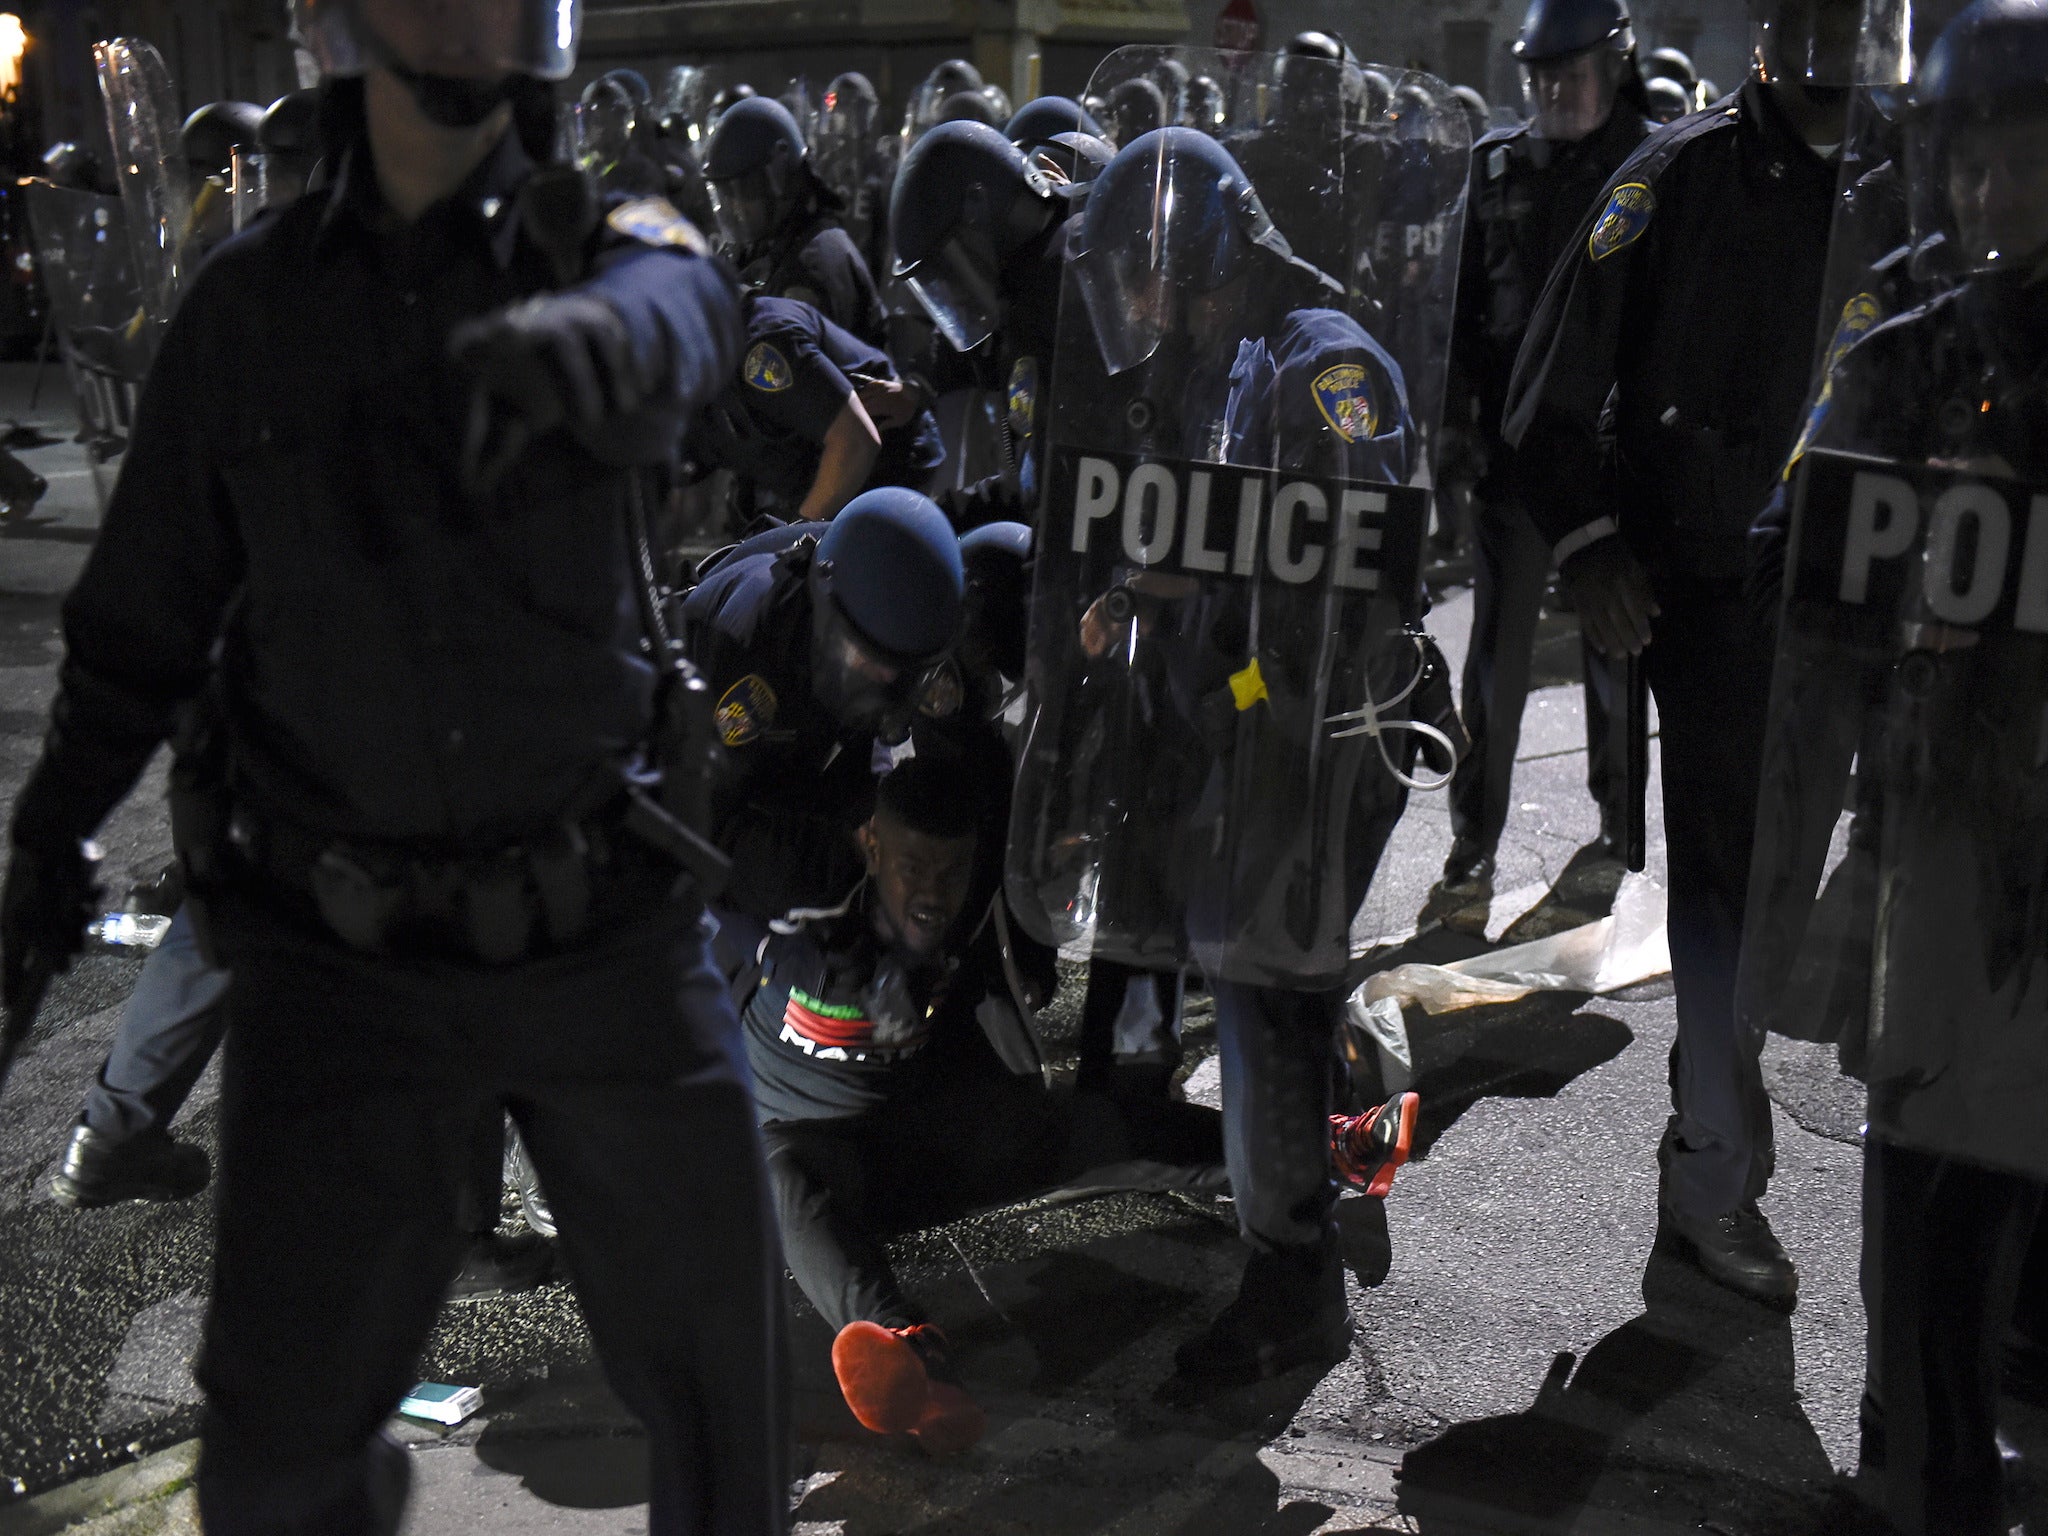 Protests in Baltimore over the death of Freddie Gray turned violent